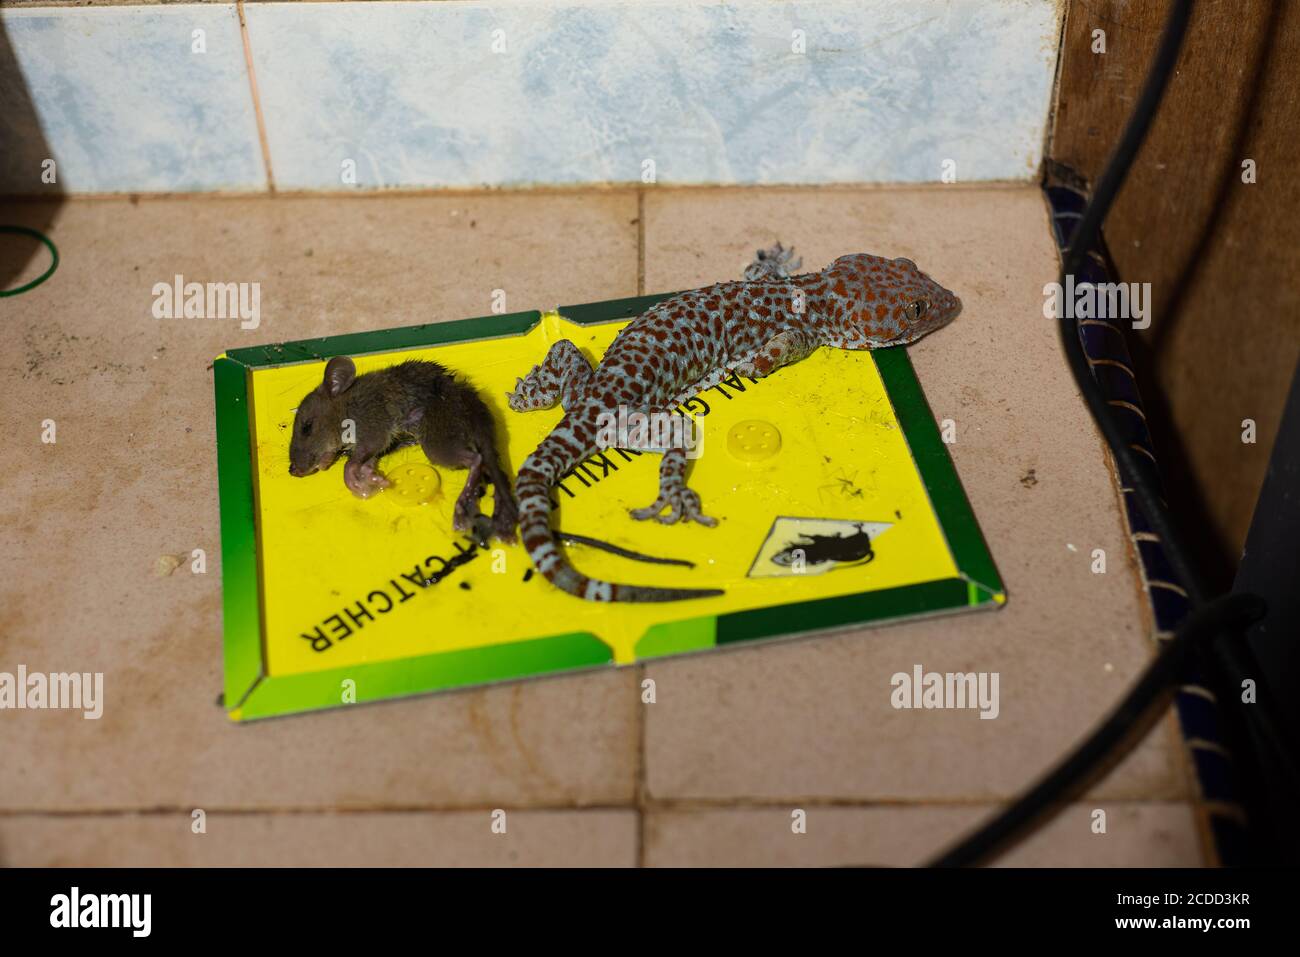 https://c8.alamy.com/comp/2CDD3KR/gecko-and-mice-trapped-in-rat-glue-2CDD3KR.jpg